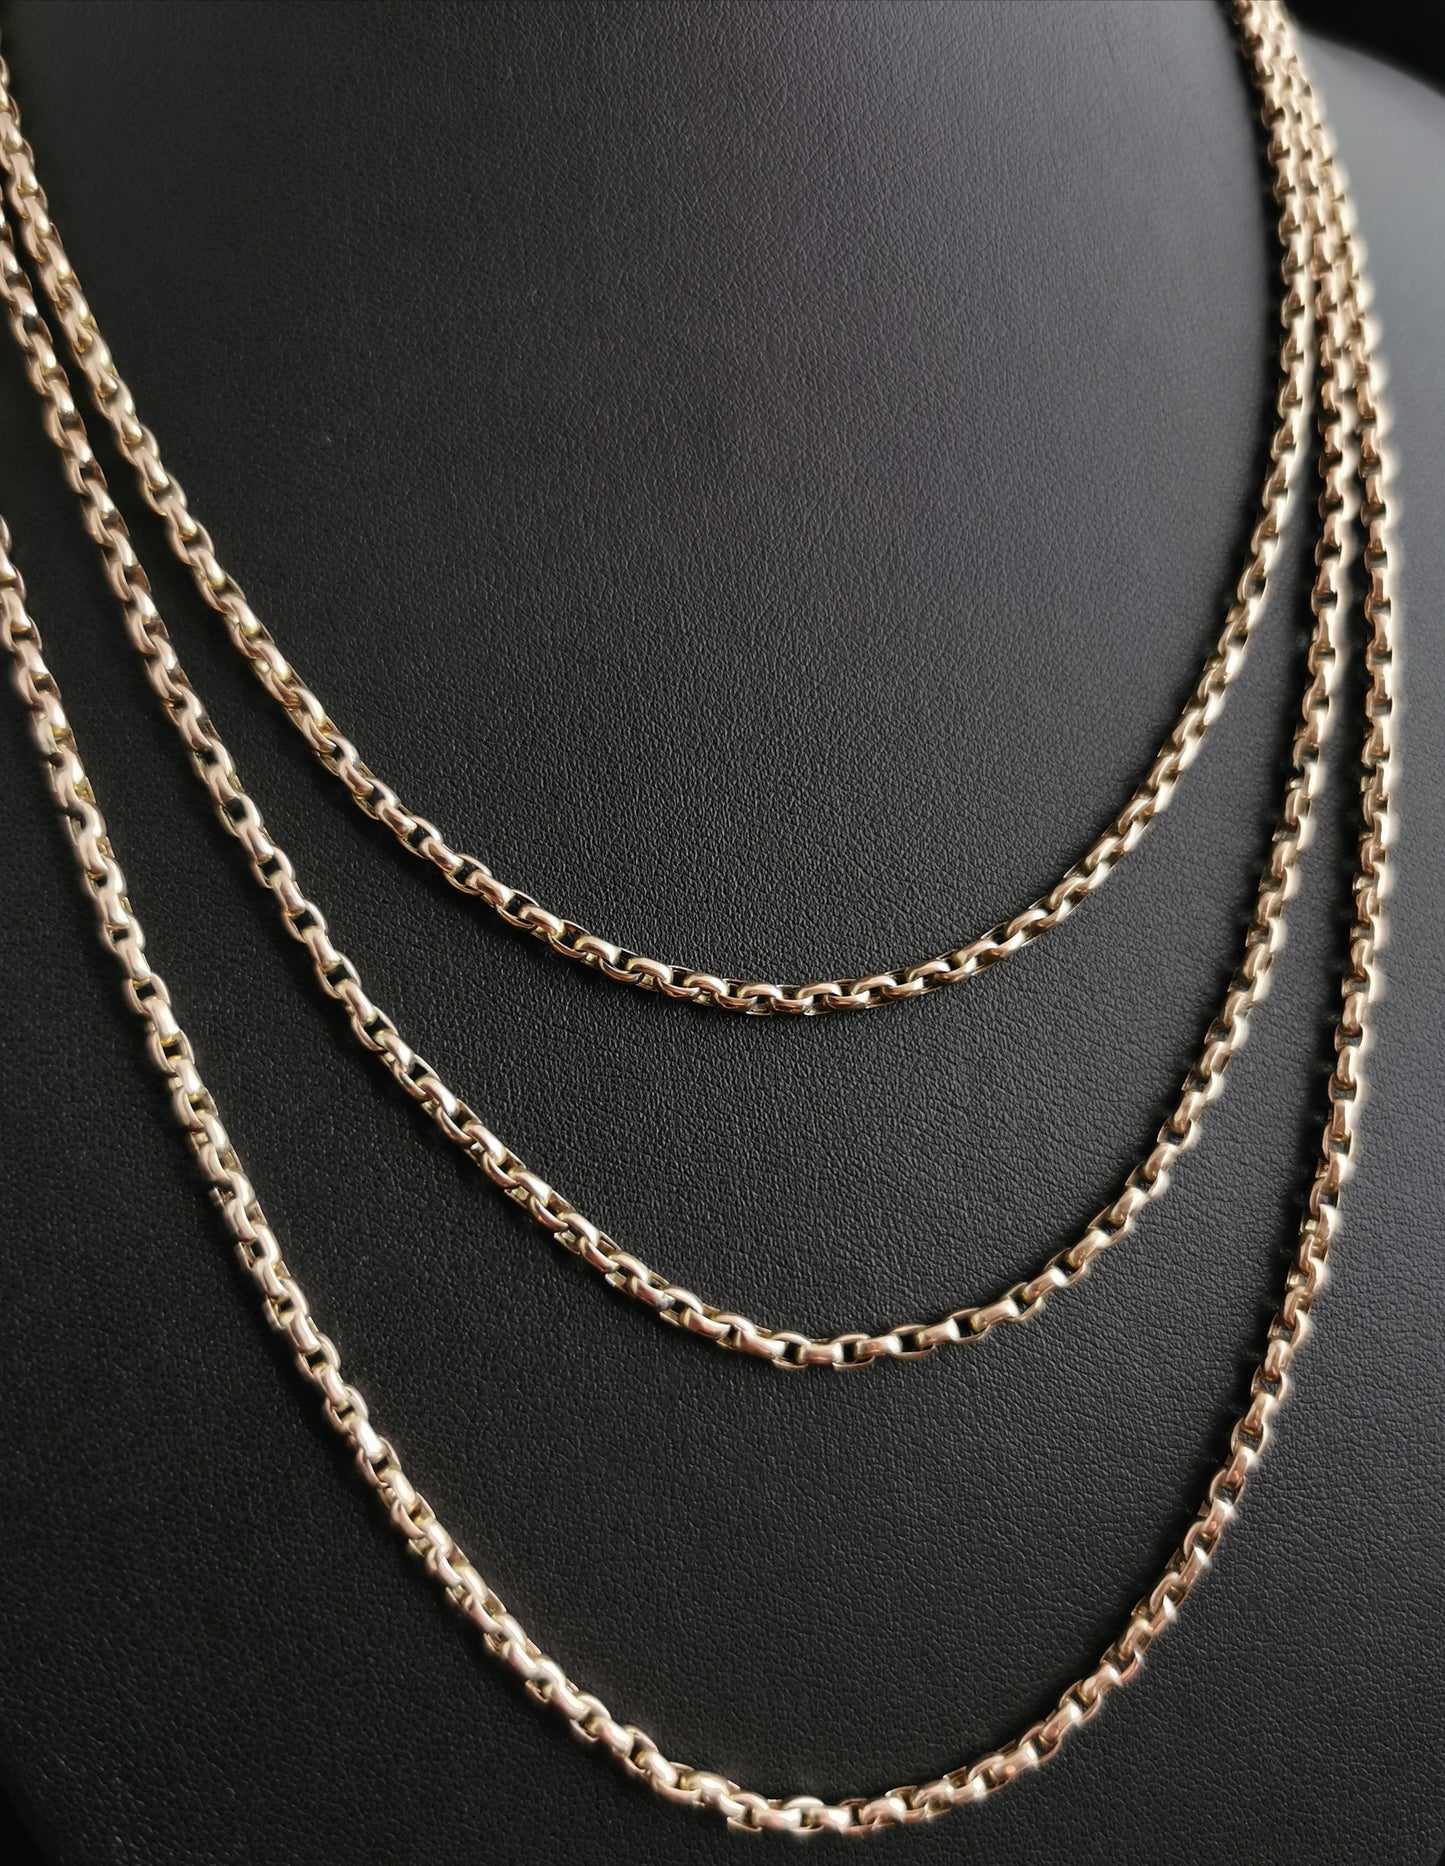 Antique 9ct gold longuard chain necklace, Edwardian, muff chain